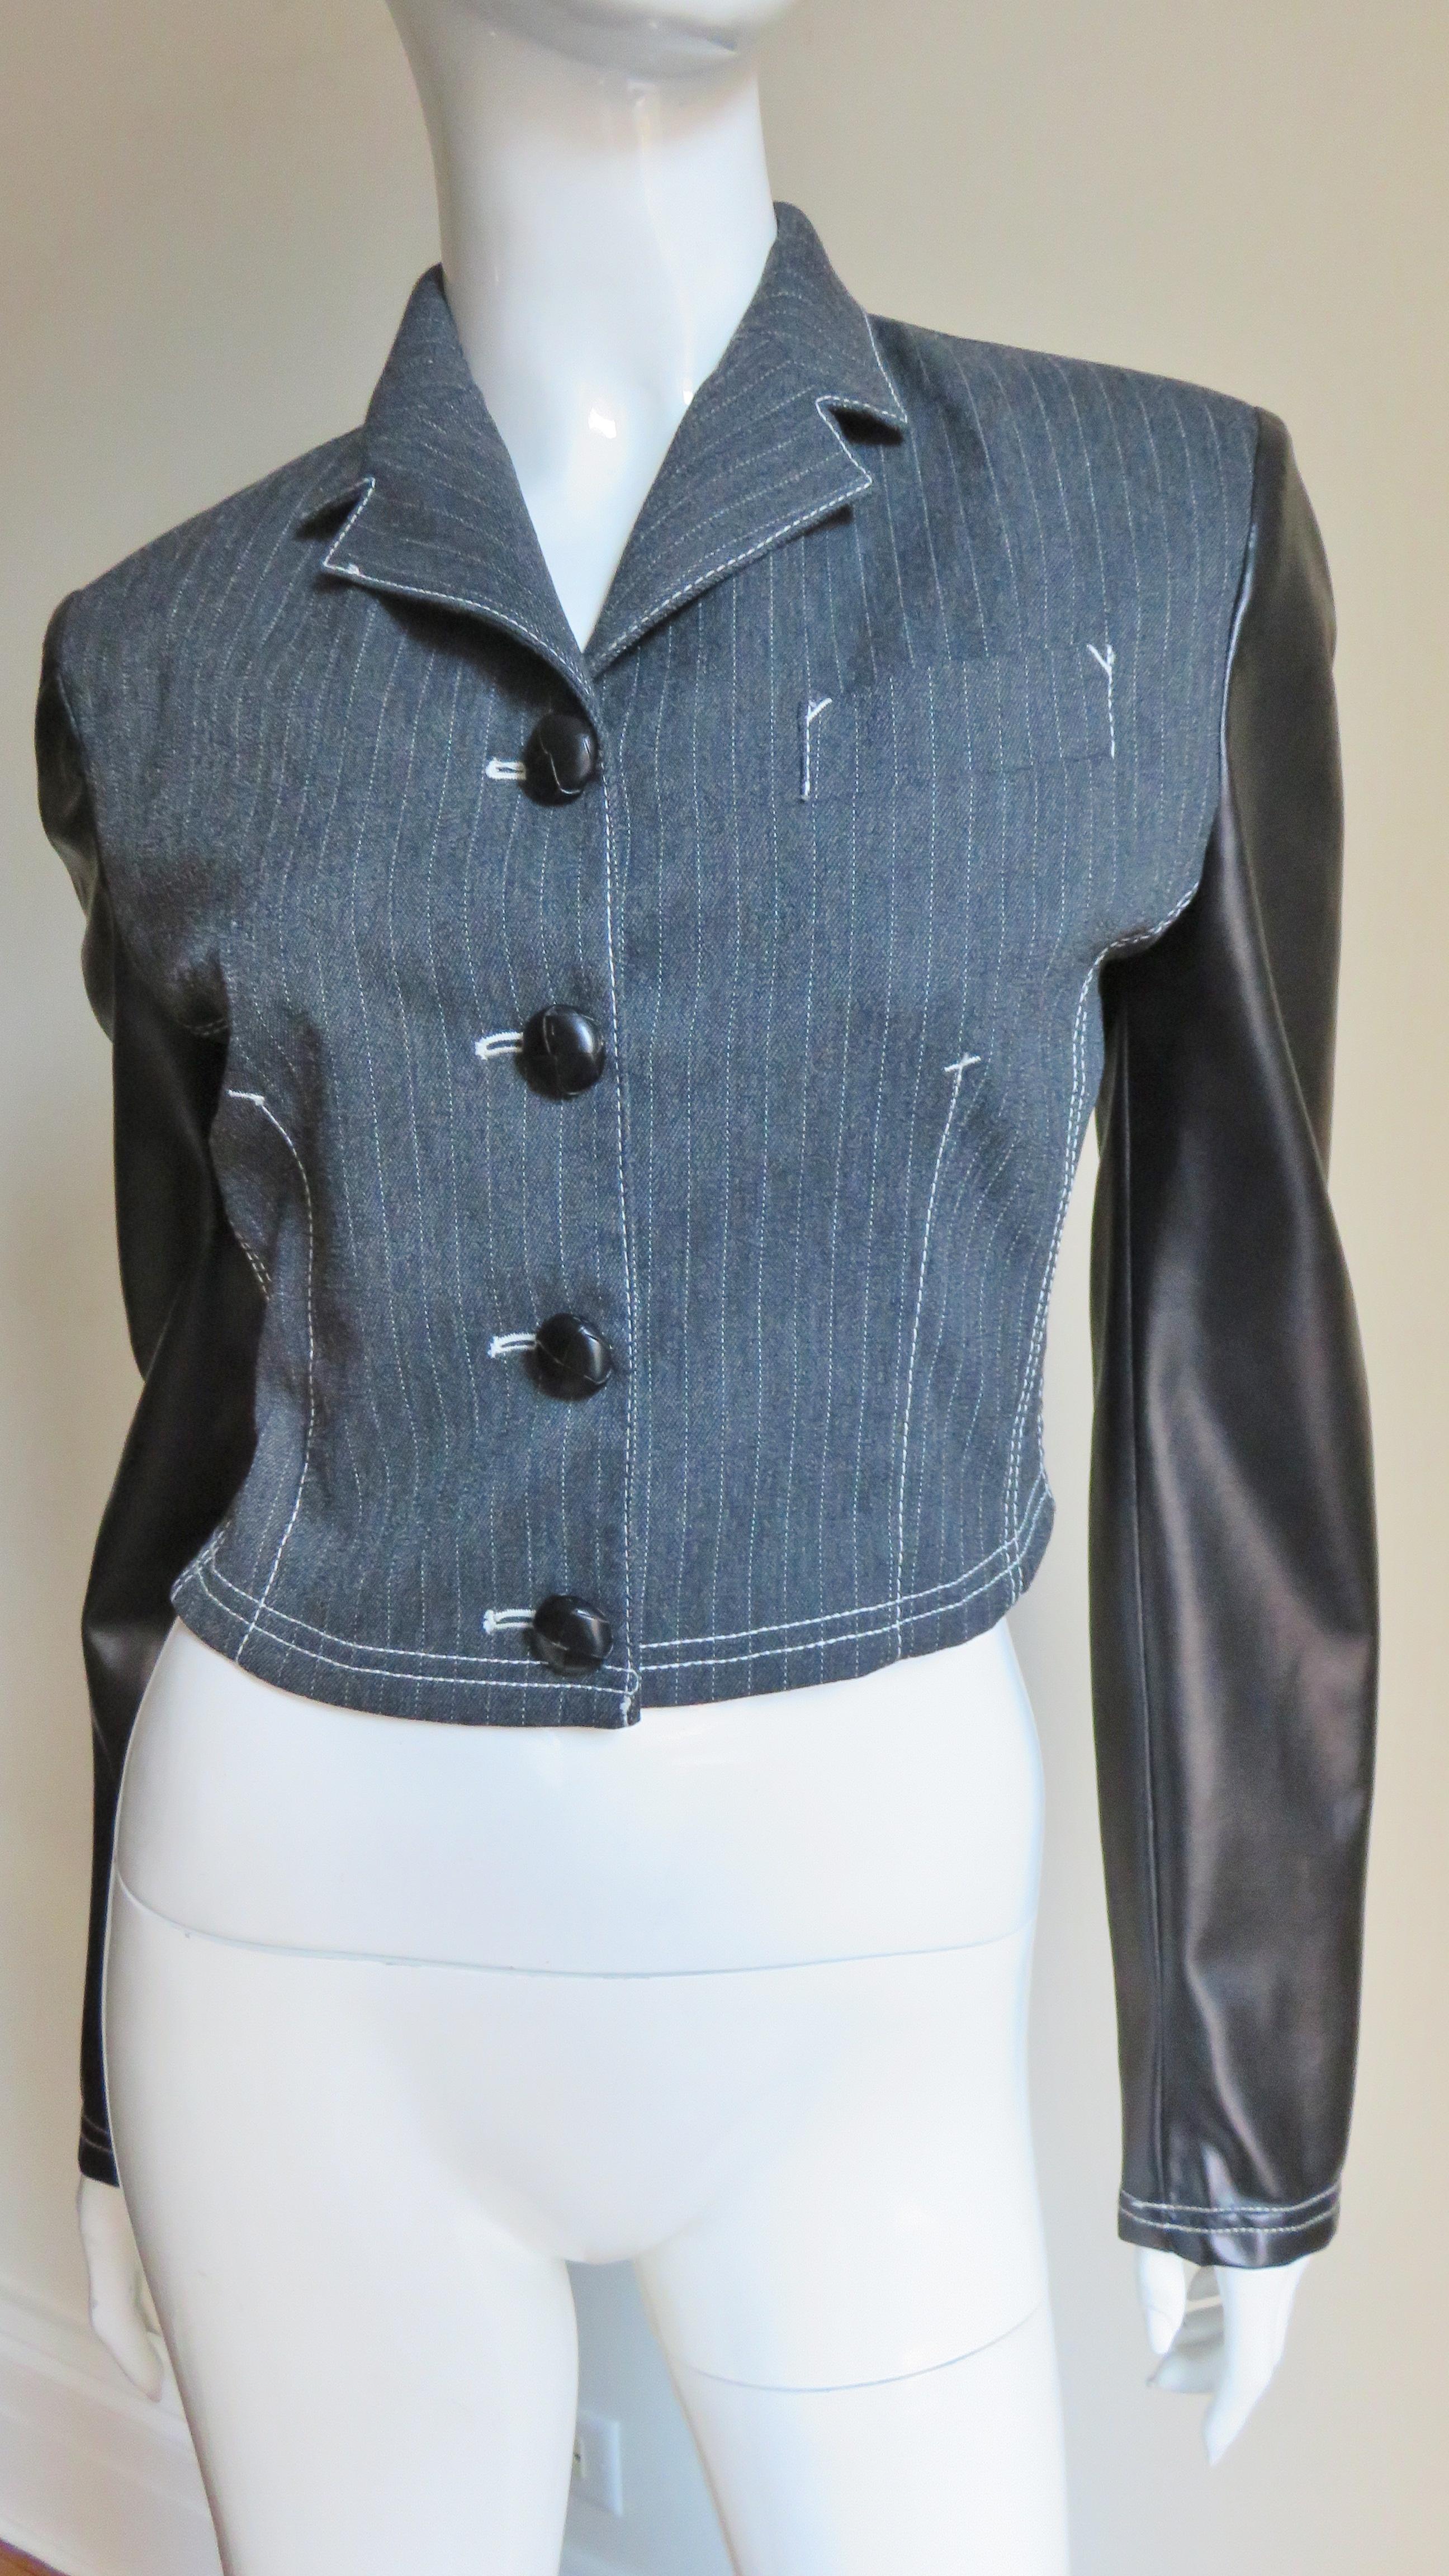 A fabulous cropped jacket from Jean Paul Gaultier's Junior Gaultier line made of grey pinstriped wool and black polyurethane back and sleeves.  It has a small lapel collar, breast pocket, princess seaming and black front buttons.  All seams are